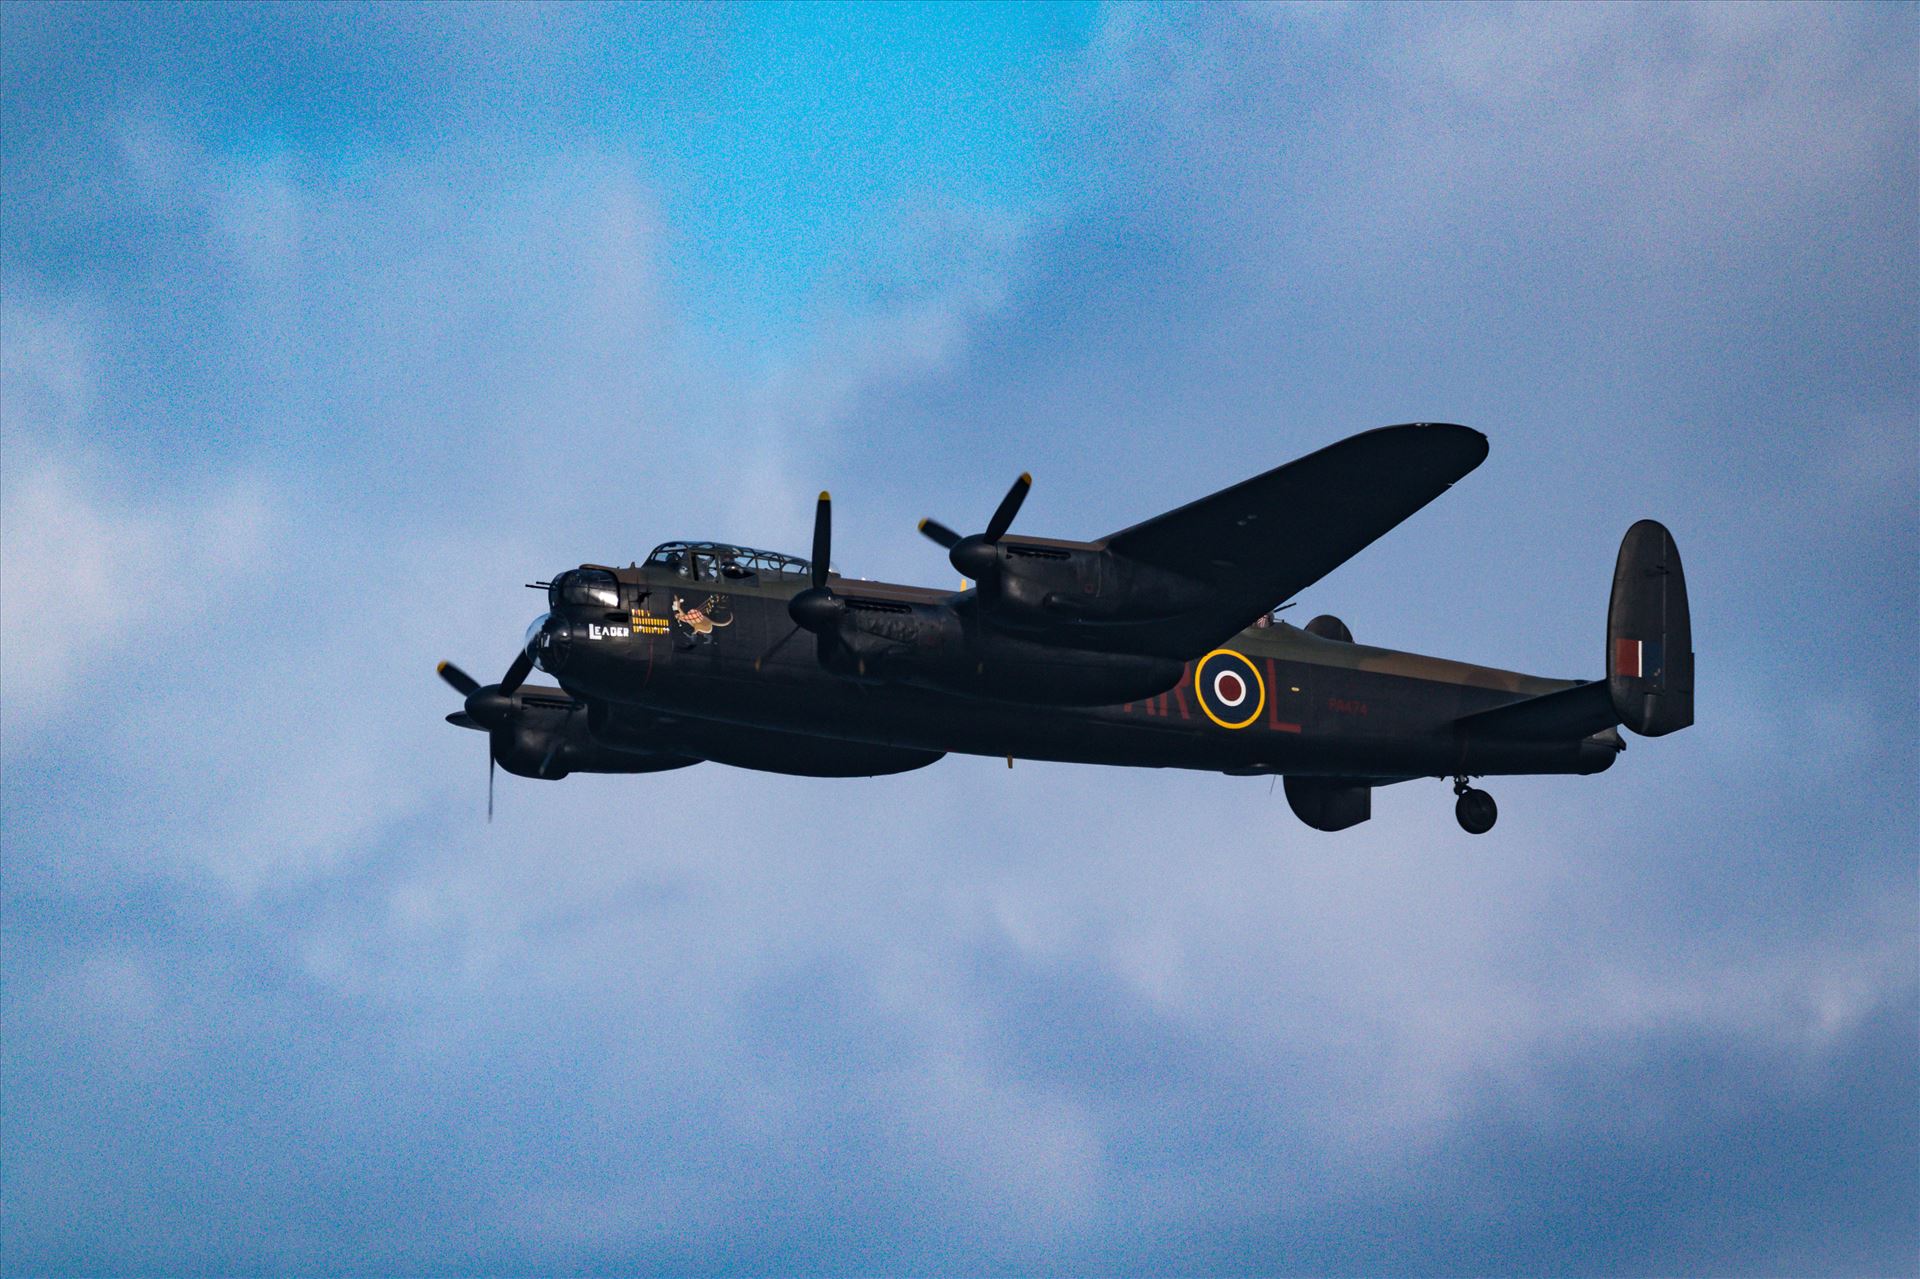 Lancaster Bomber Fly By - Taken in 2017 at Sunderland International Airshow by AJ Stoves Photography